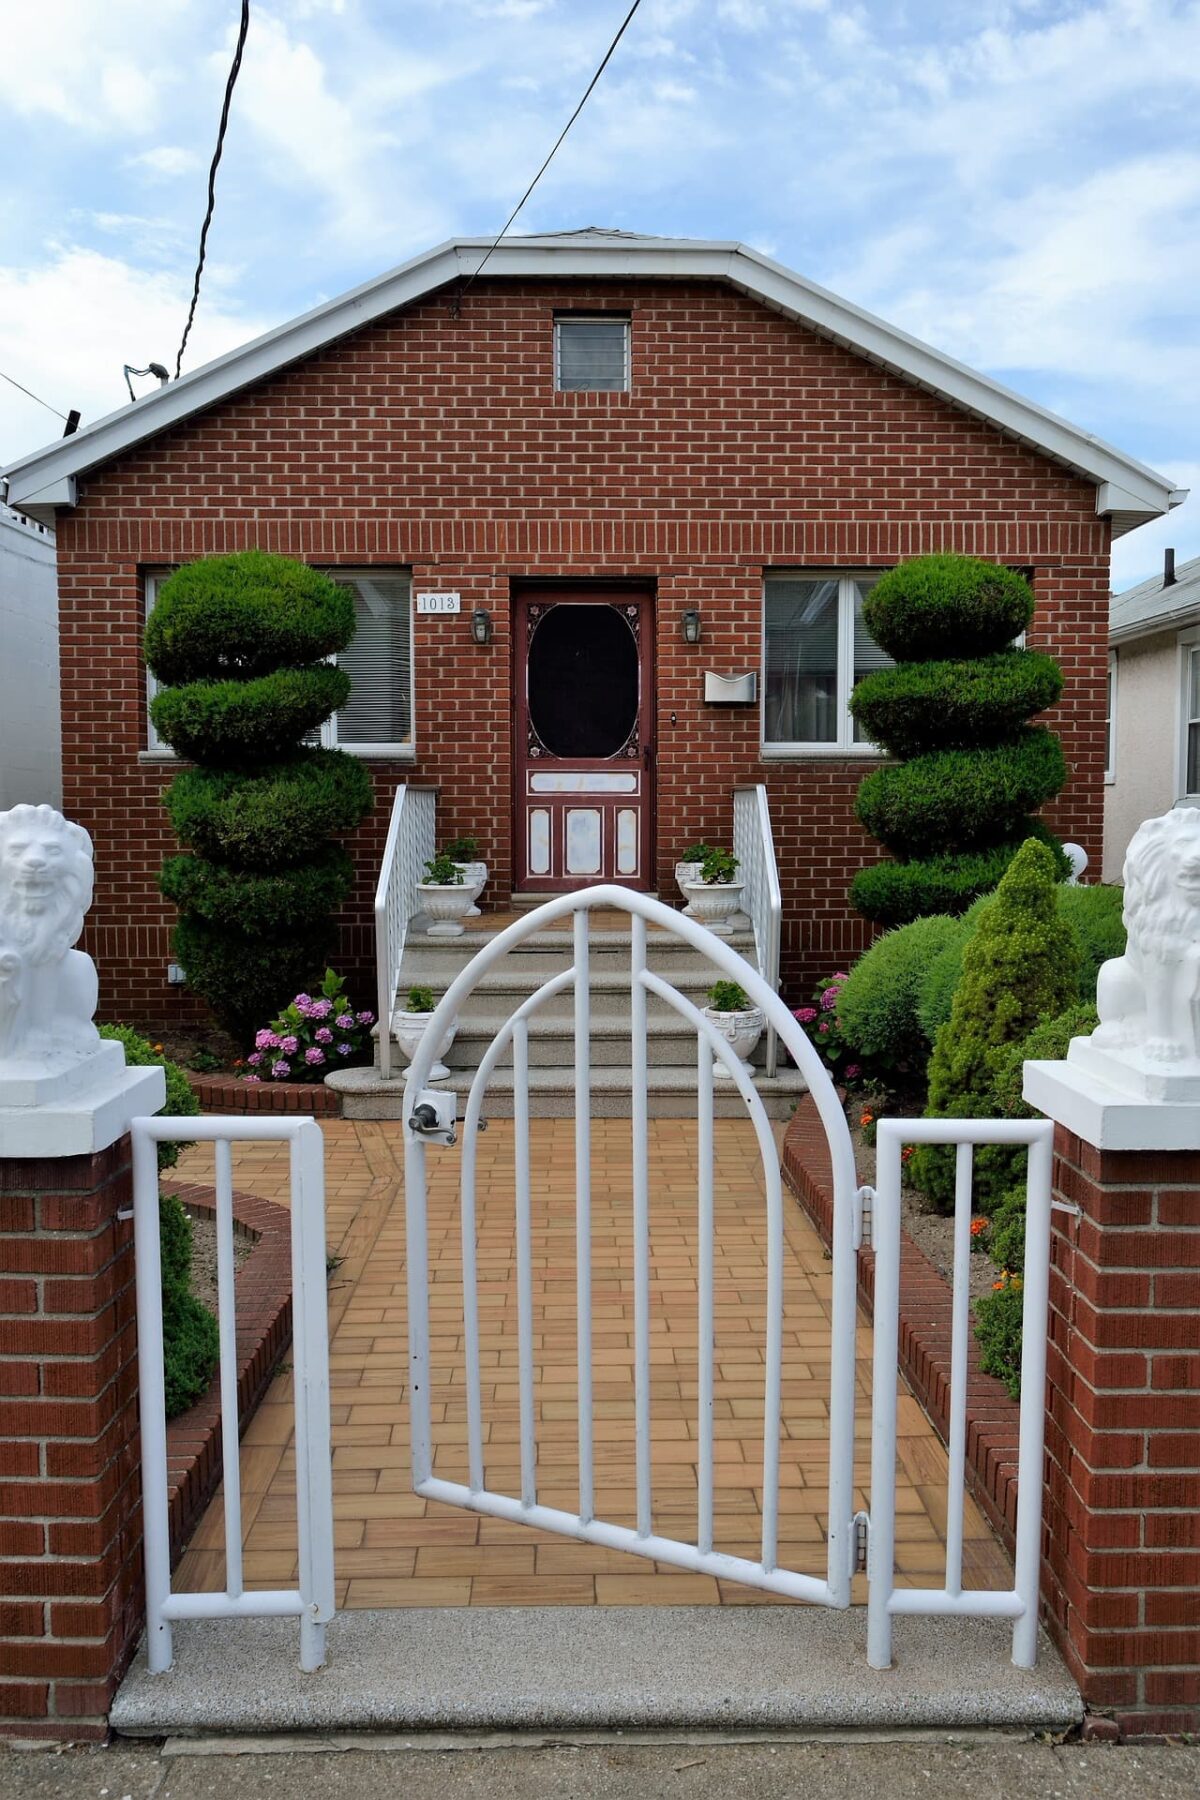 house with gate - Top 10 Ways To Add Curb Appeal To Your Home